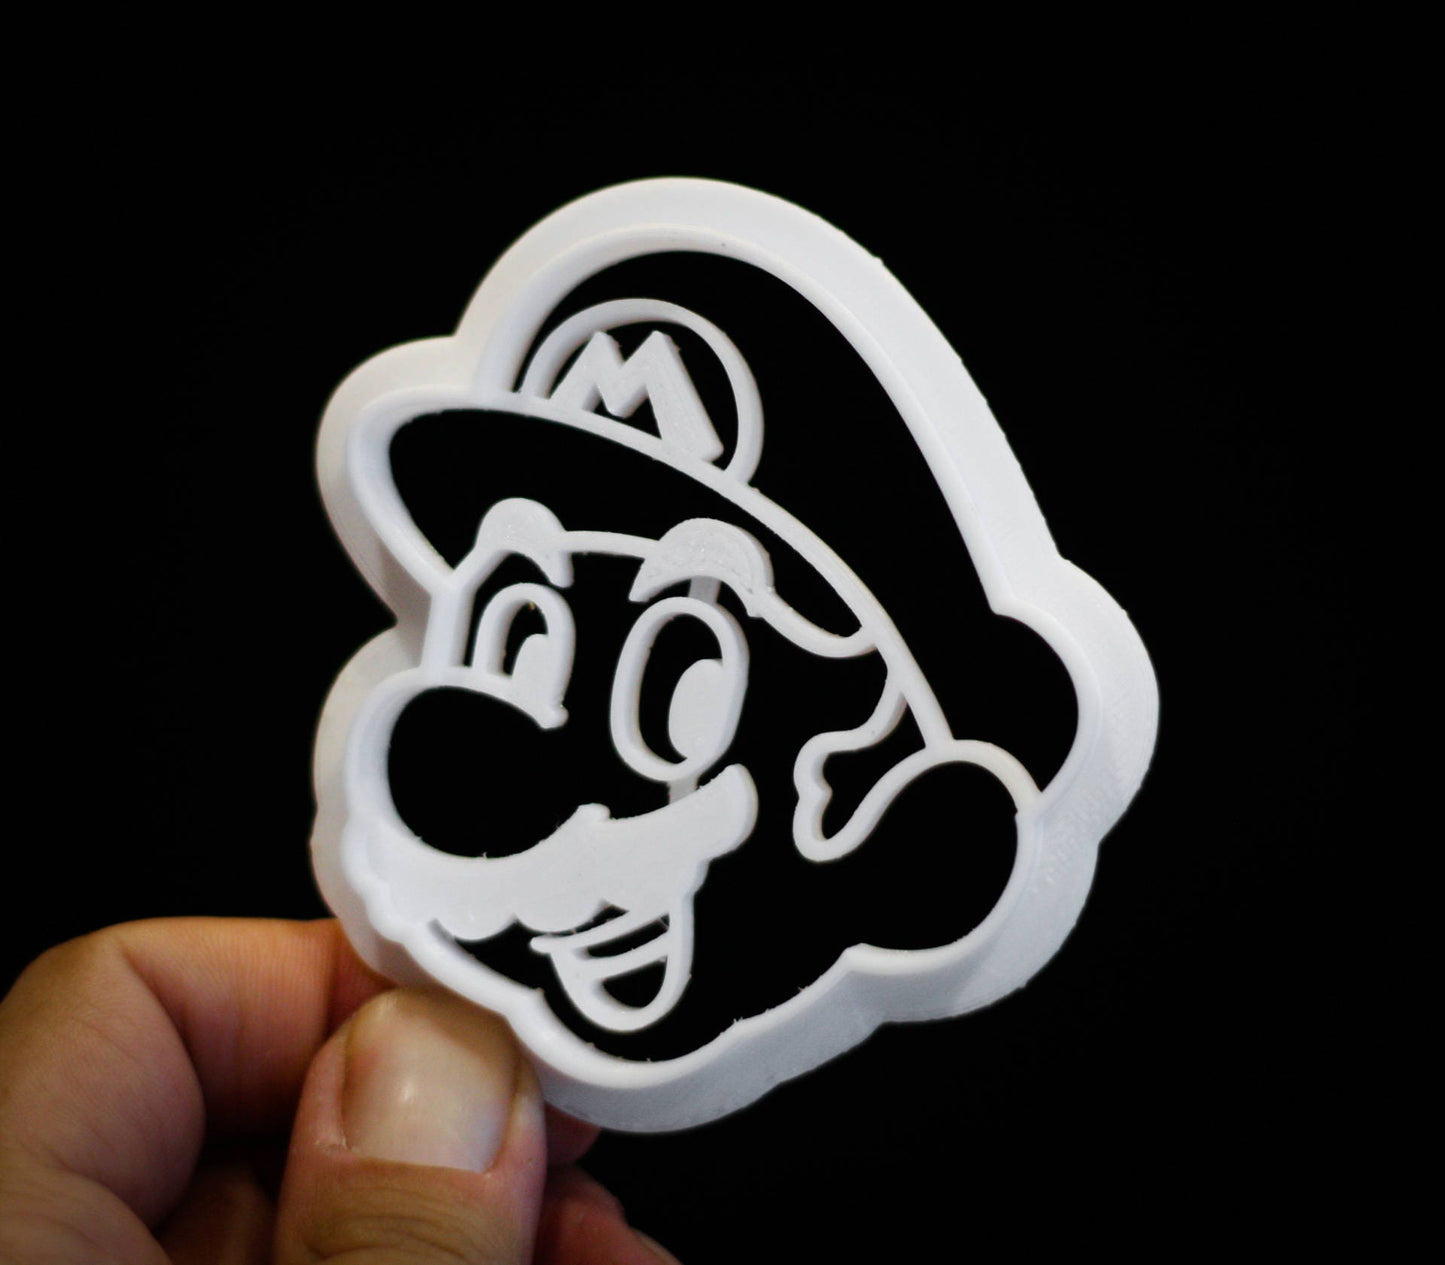 Super Mario Cookie Cutter | Fondant cutter | Super mario Birthday Party | Video Game Cookie Cutters | super mario bros cookie mold - 3DPrintProps